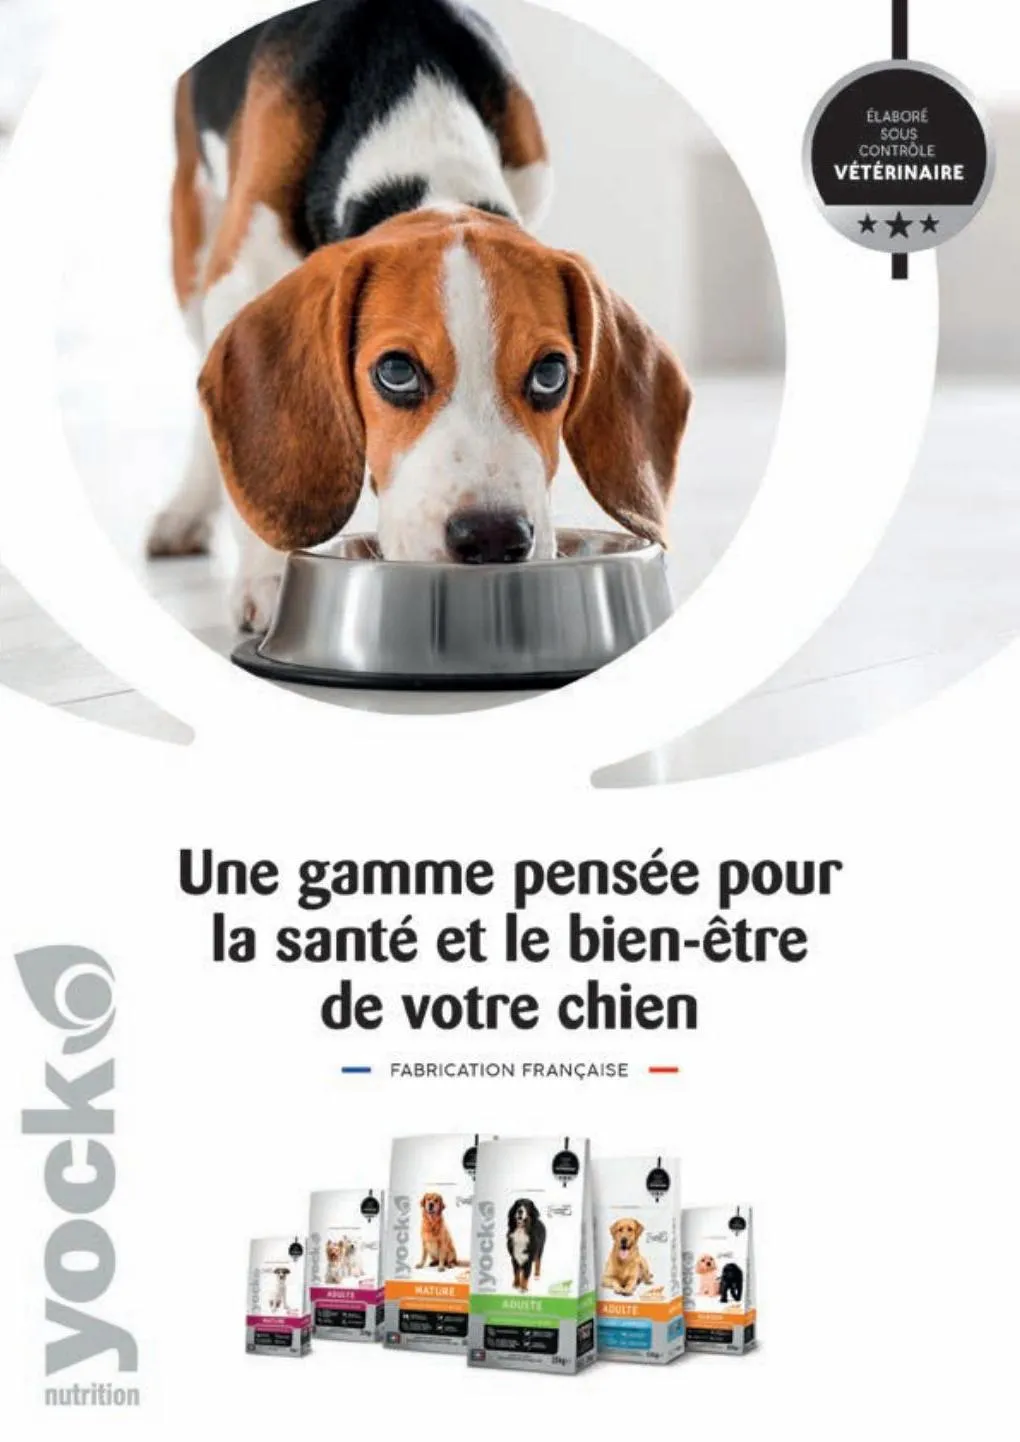 Catalogue Guide chiens et chats 2022-2023, page 00043